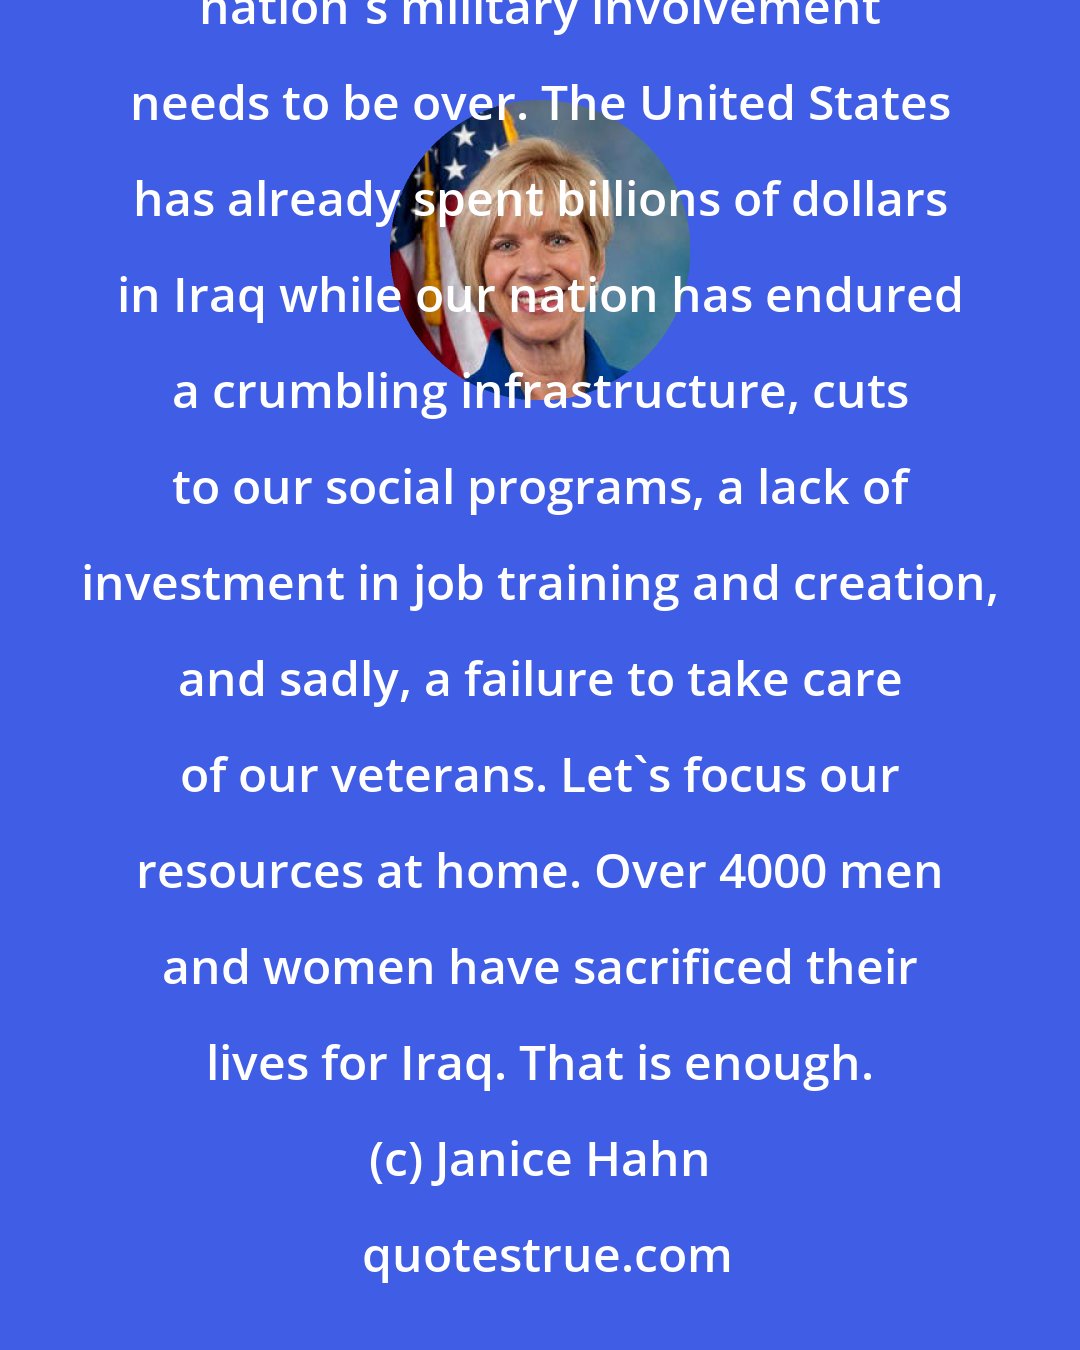 Janice Hahn: I oppose U.S. military intervention in Iraq. I believe that we should not send troops or engage in air strikes-our nation's military involvement needs to be over. The United States has already spent billions of dollars in Iraq while our nation has endured a crumbling infrastructure, cuts to our social programs, a lack of investment in job training and creation, and sadly, a failure to take care of our veterans. Let's focus our resources at home. Over 4000 men and women have sacrificed their lives for Iraq. That is enough.